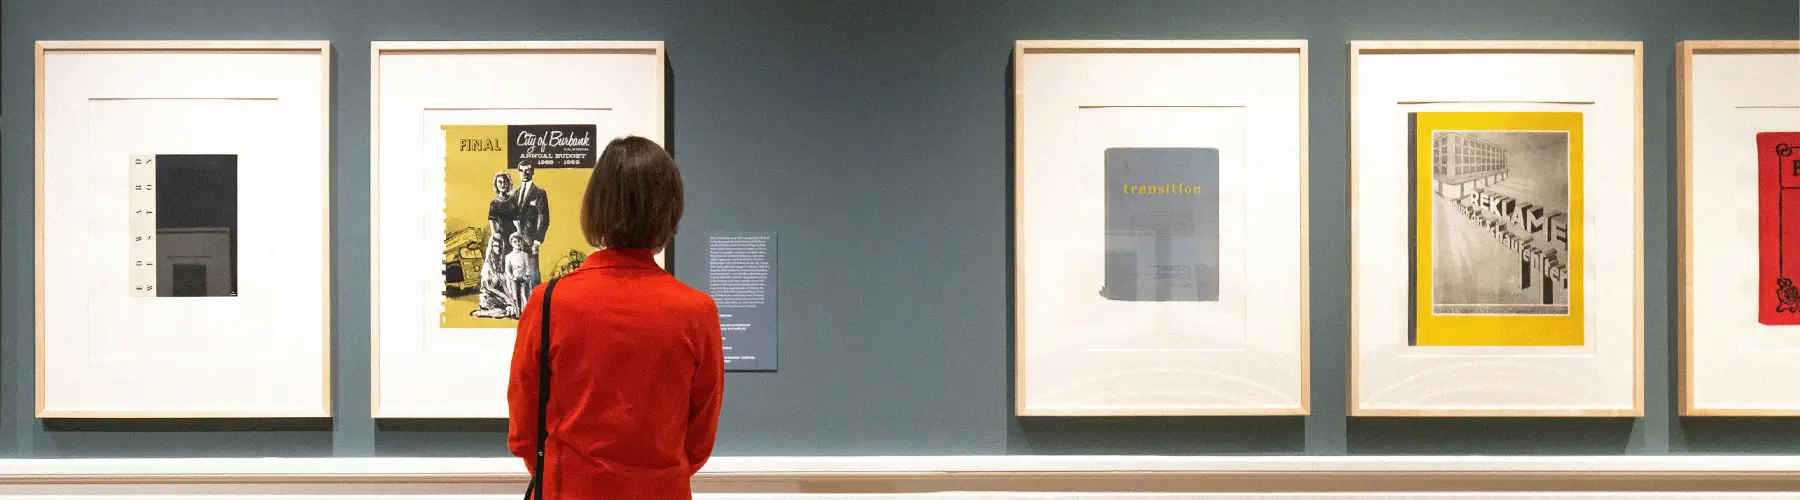 A person looks at framed artwork in a gallery.